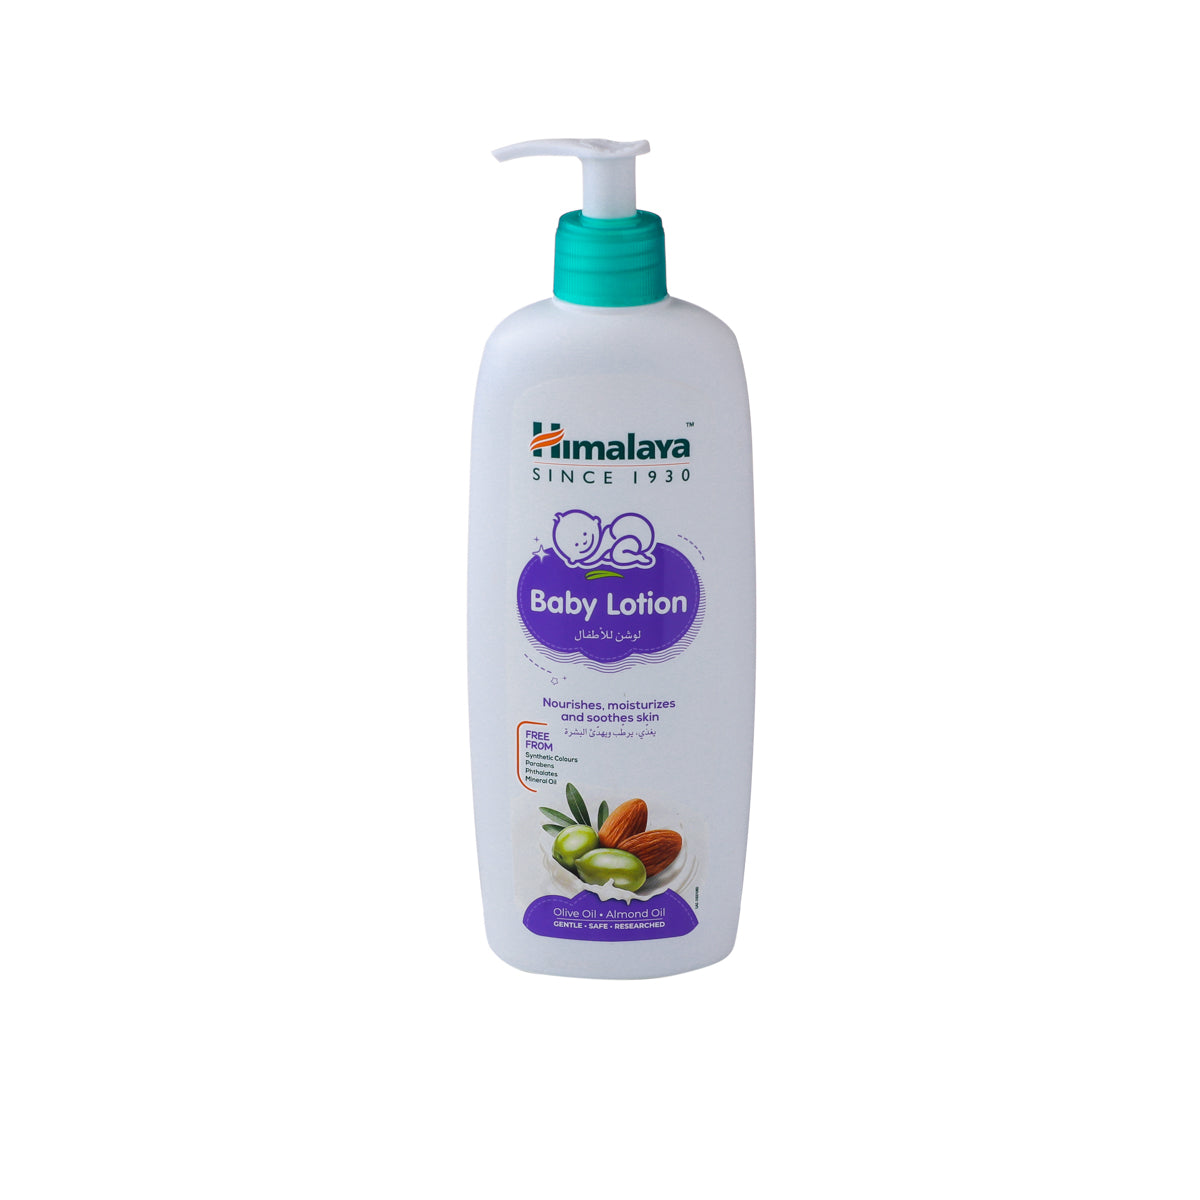 Himalaya Baby Lotion Nourishes Moisturizes And Soothes Skin 400Ml